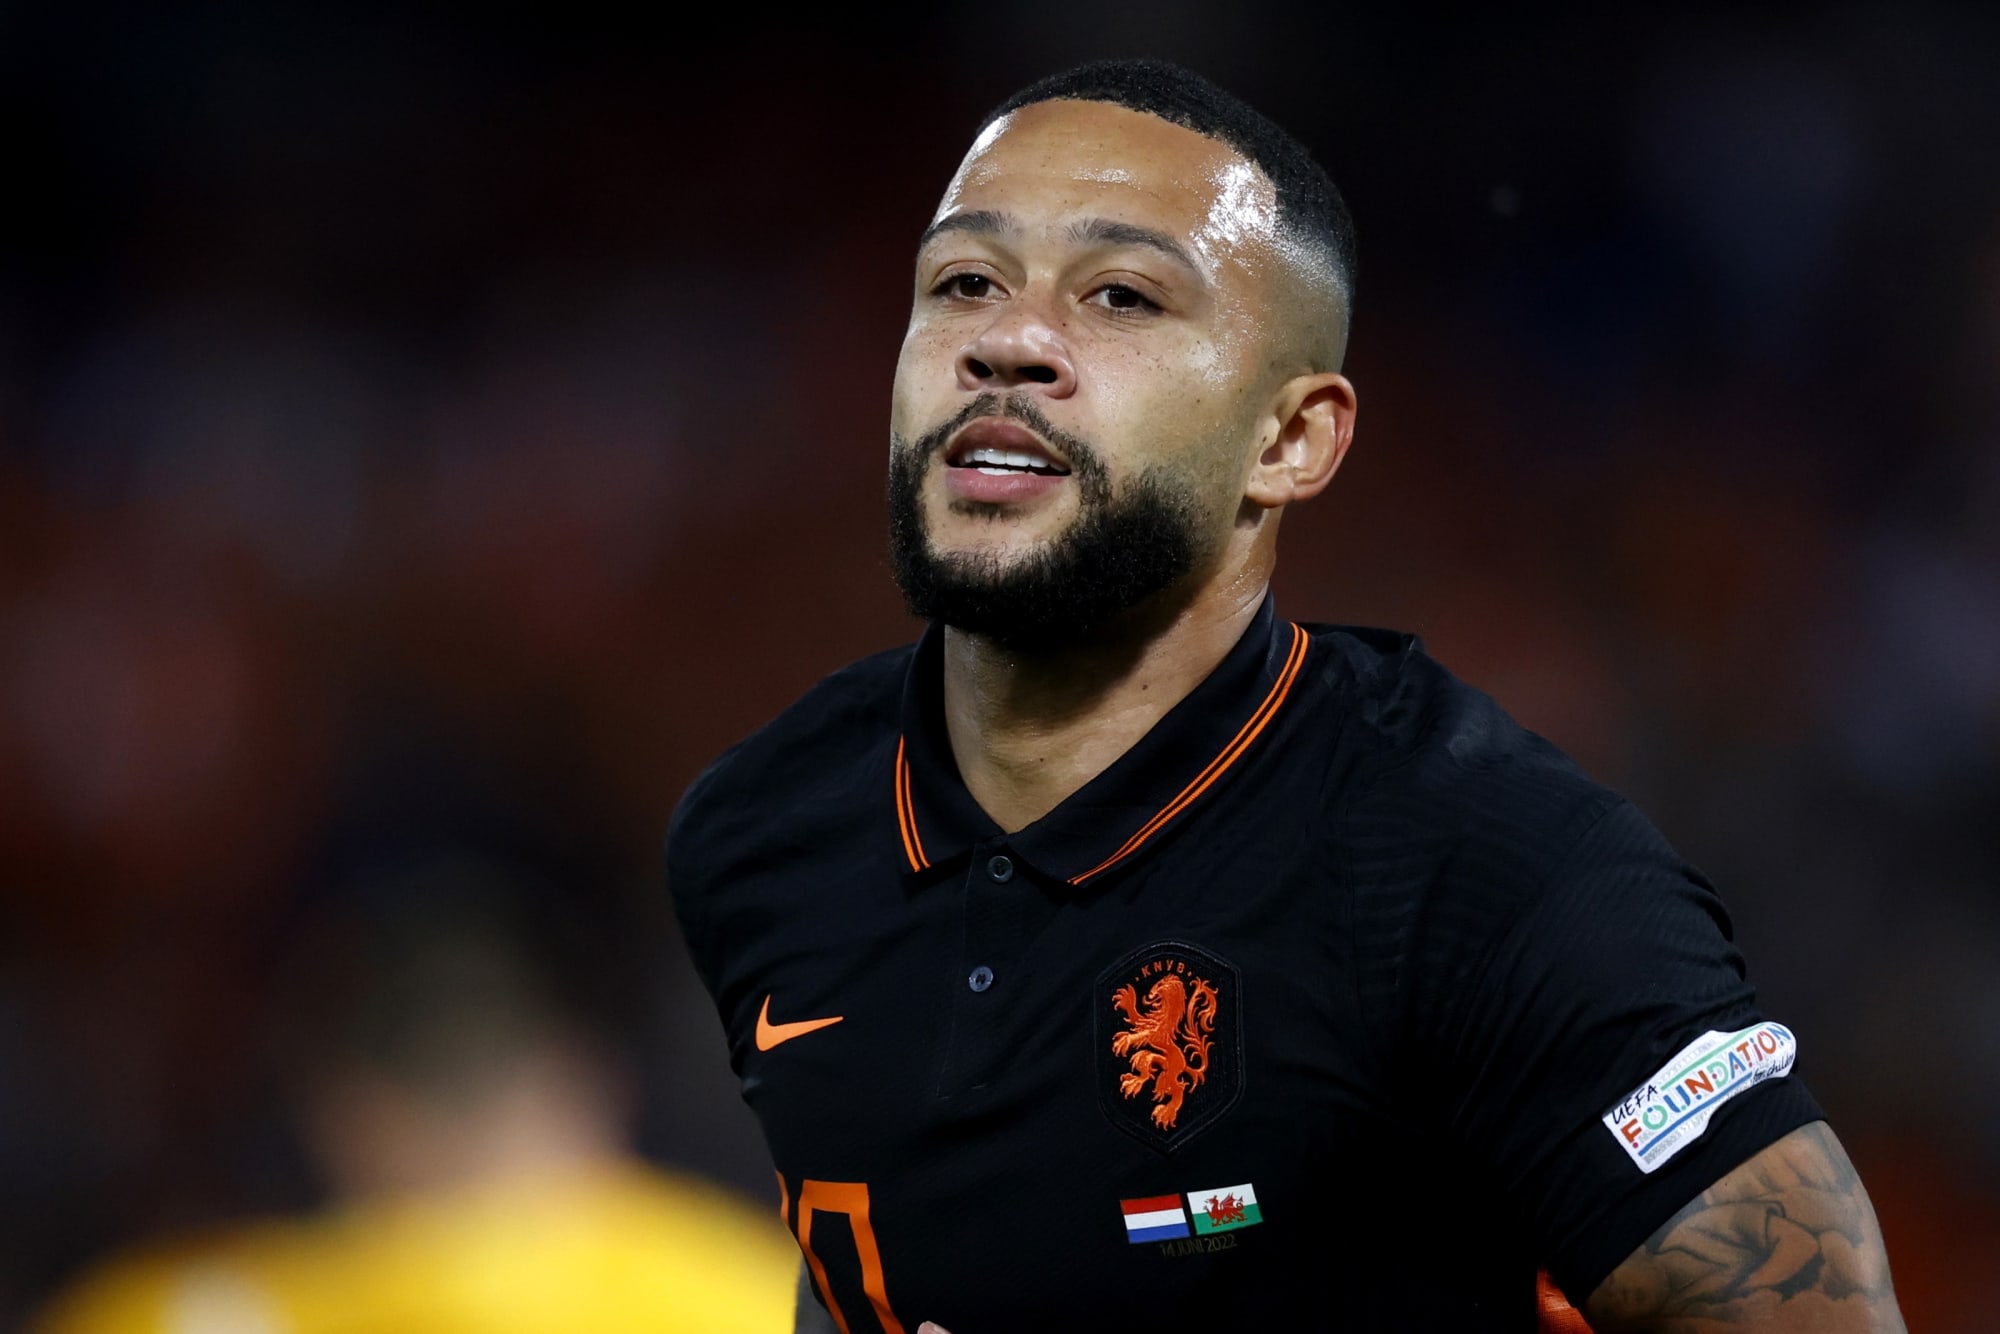 A few things about potential Depay transfer that should concern Tottenham